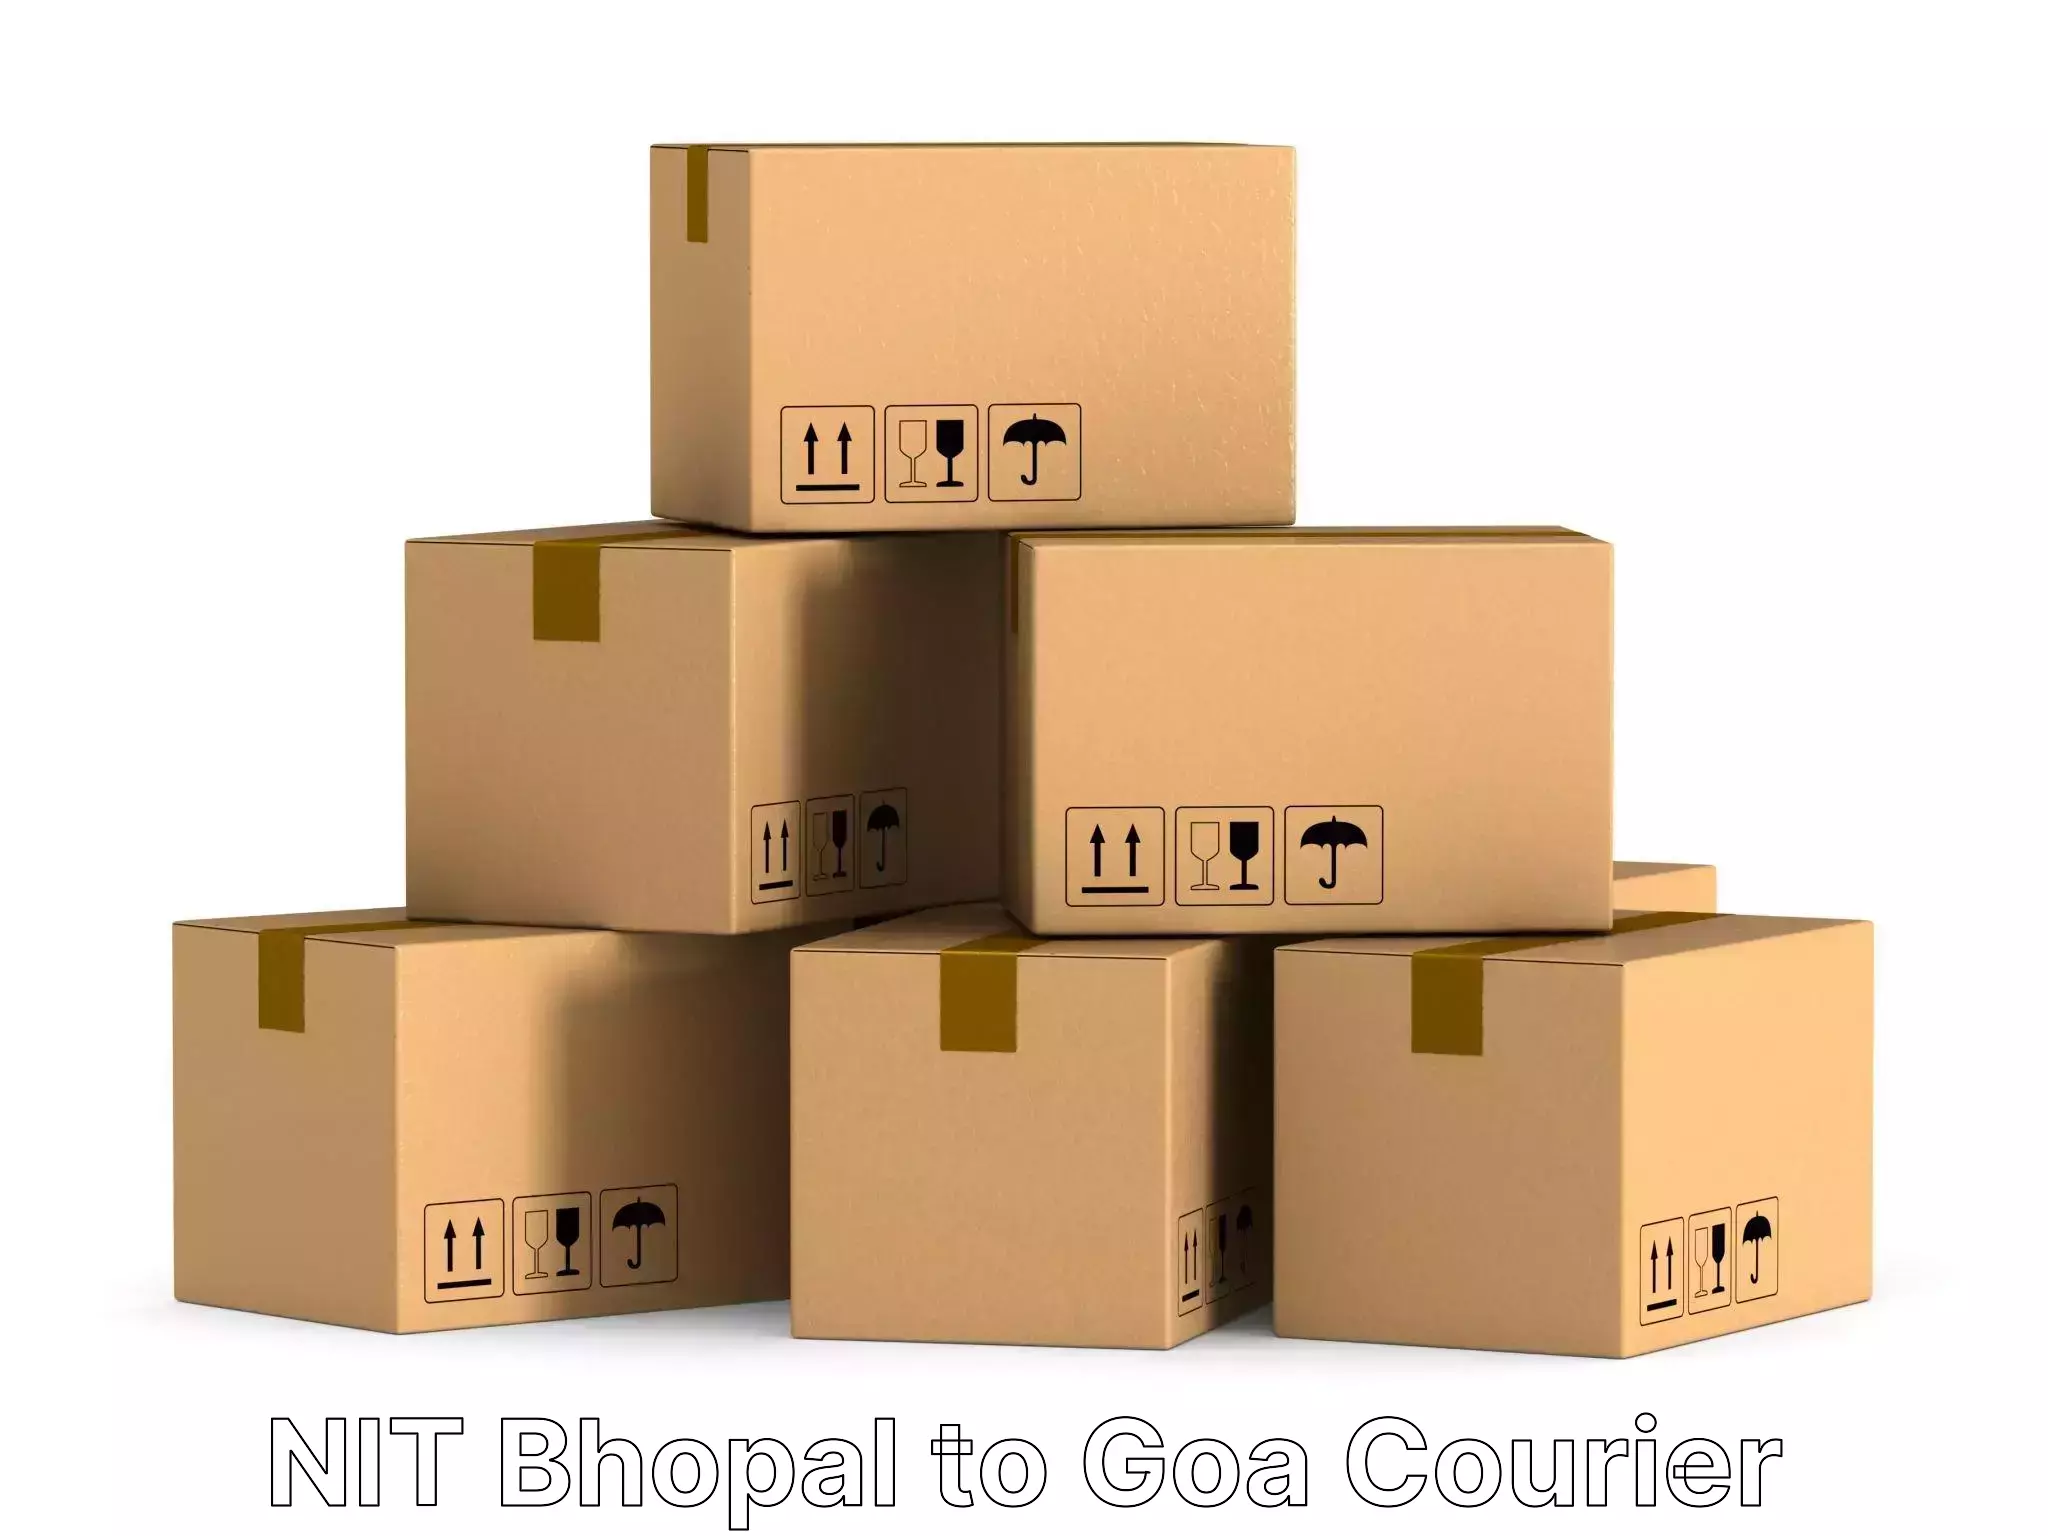 Efficient relocation services NIT Bhopal to IIT Goa